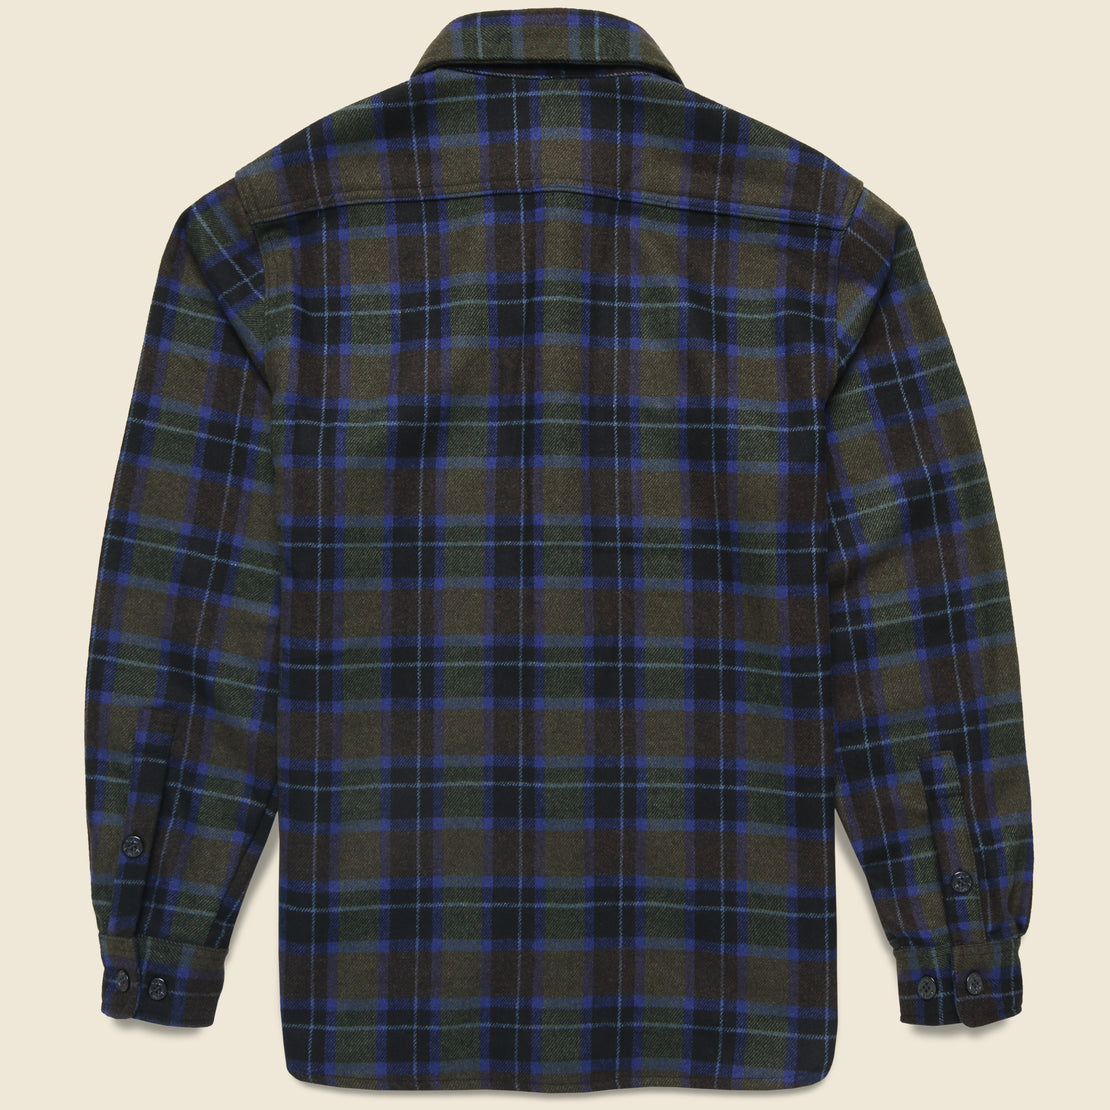 CPO Wool Shirt - Spruce Plaid - Schott - STAG Provisions - Tops - L/S Woven - Overshirt